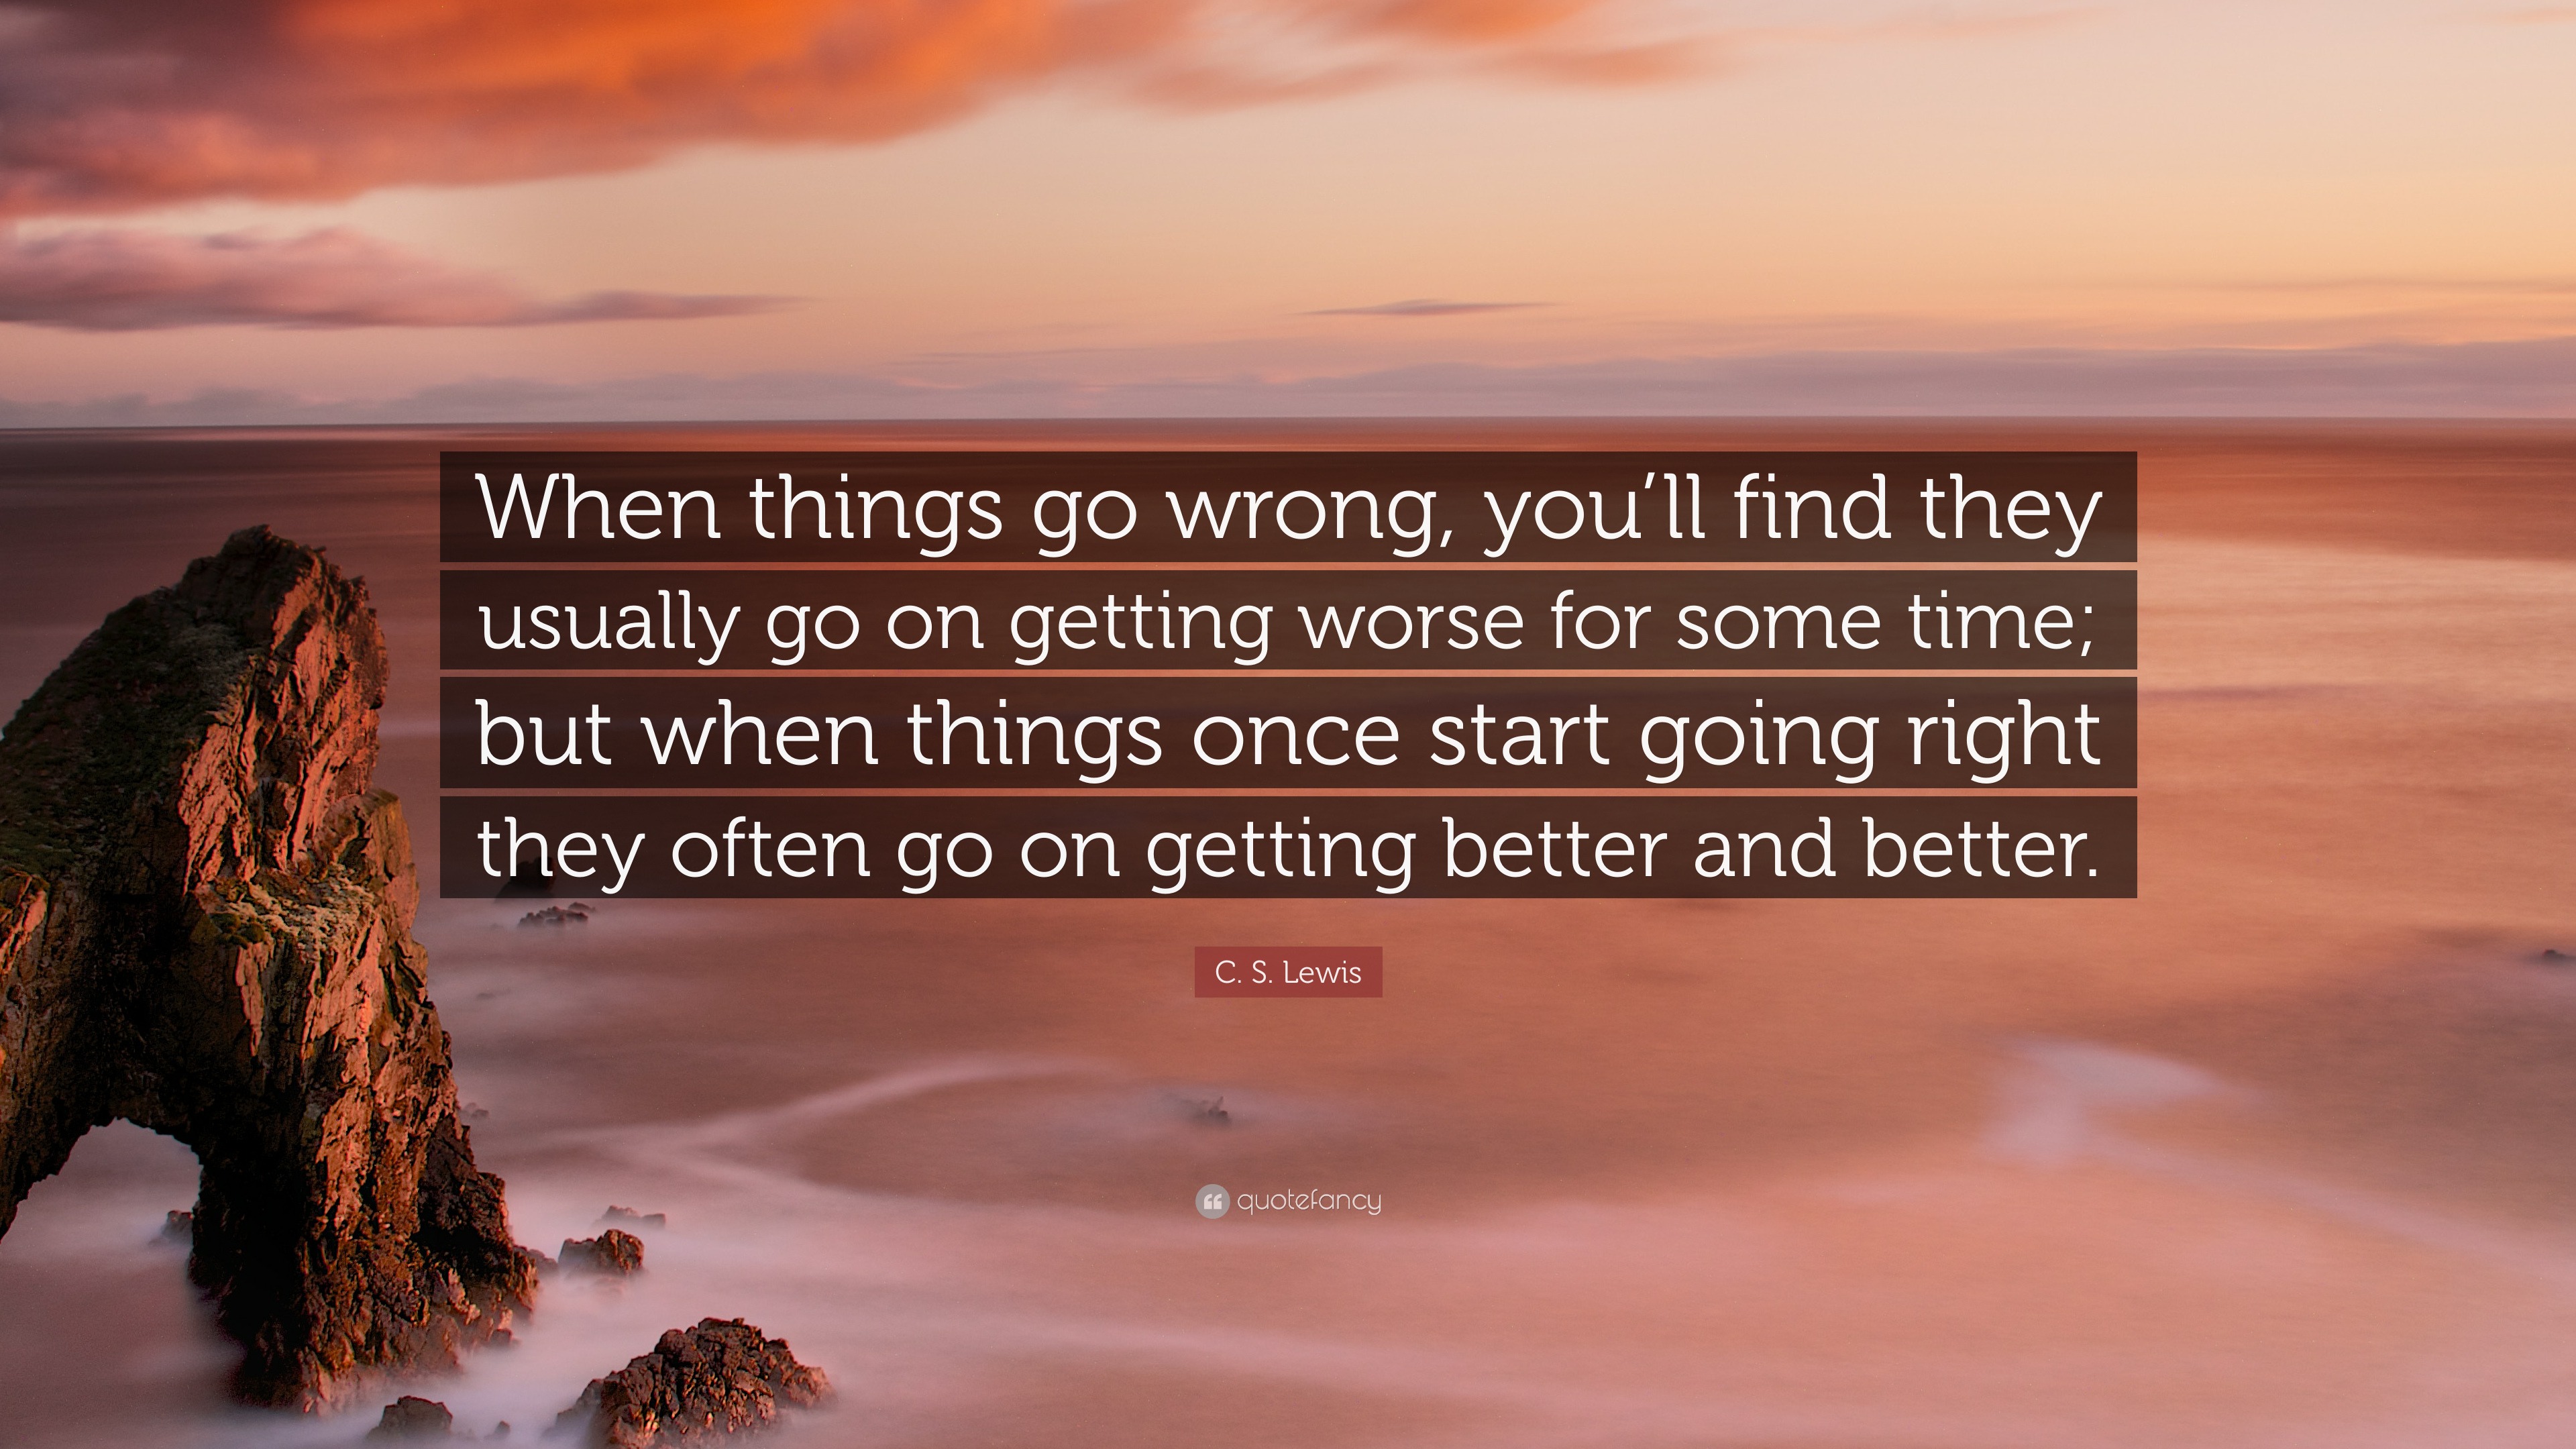 C. S. Lewis Quote: “When things go wrong, you’ll find they usually go